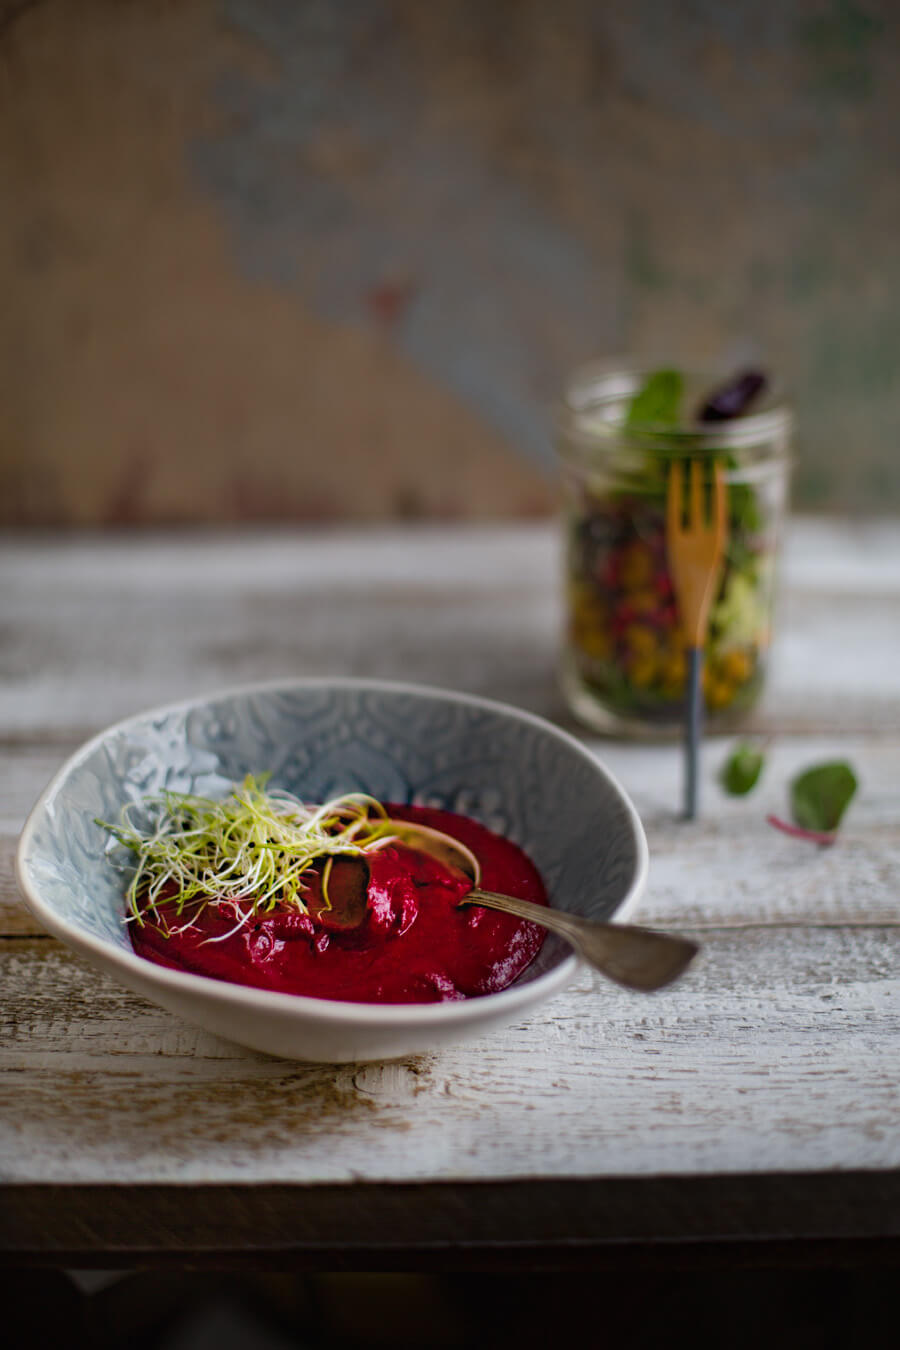 beetrootsoup with salad